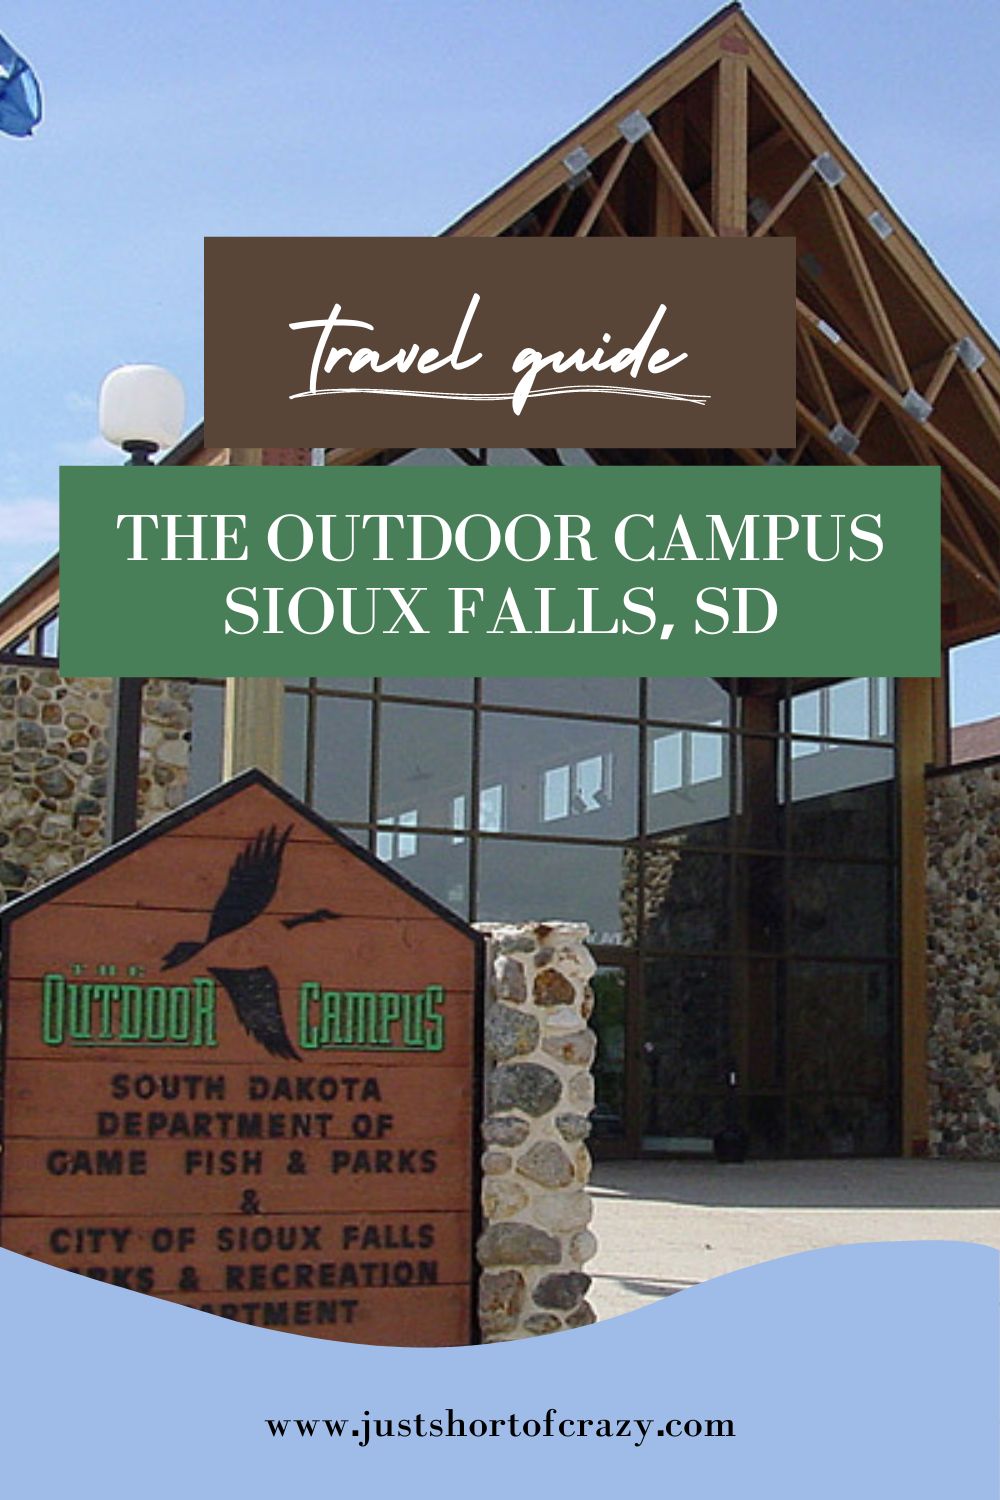 The outdoor Campus Sioux Falls, SD